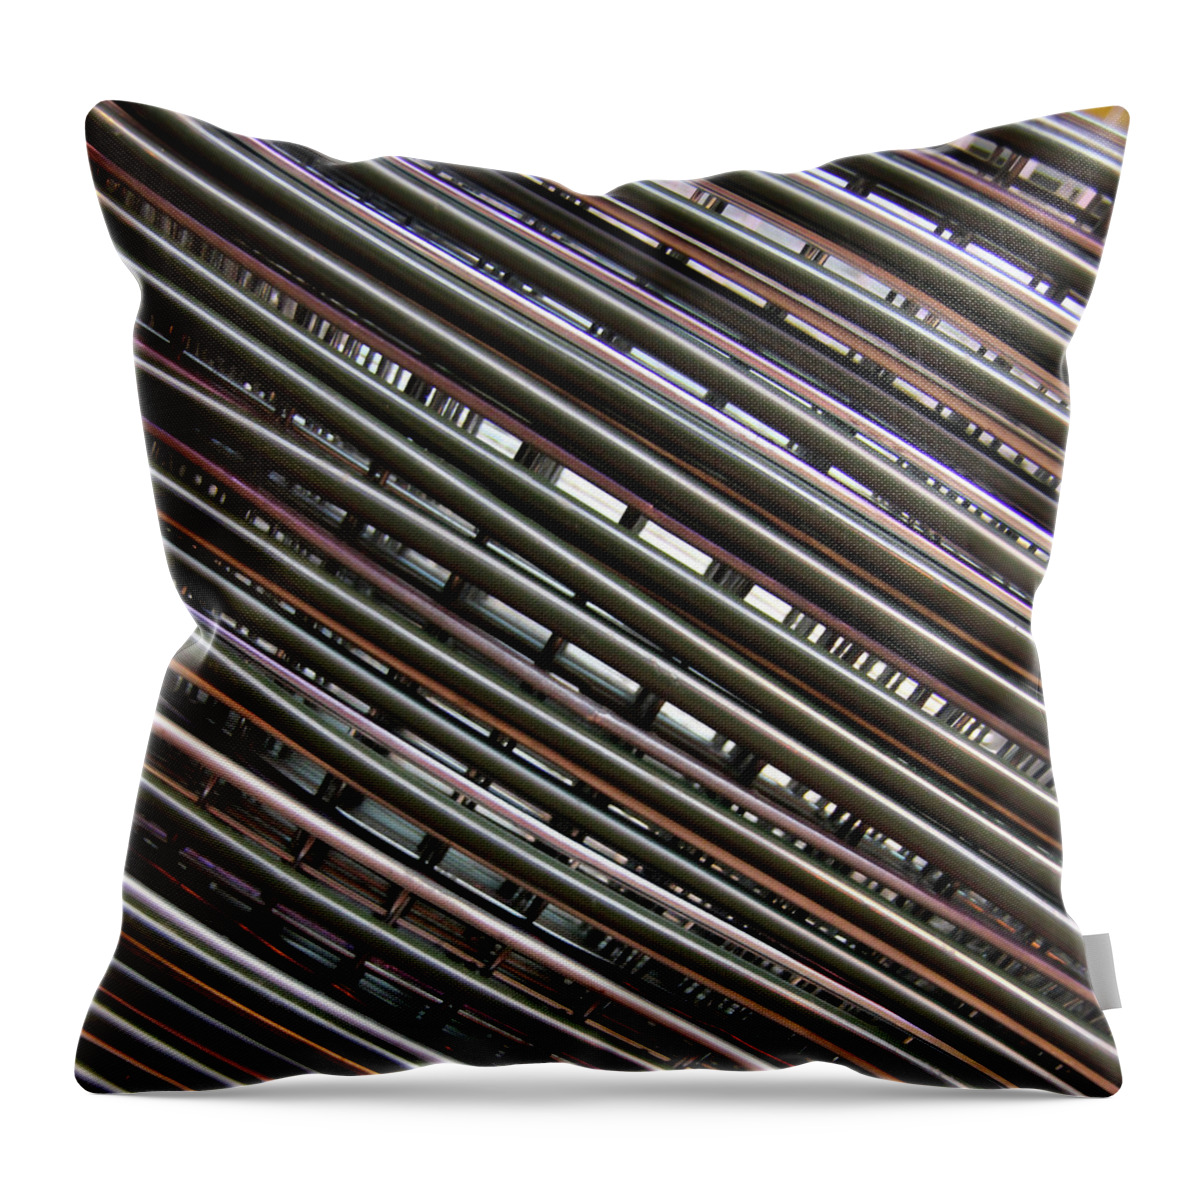 In A Row Throw Pillow featuring the photograph Abstract View Of Shopping Baskets by Andrea Kennard Photography